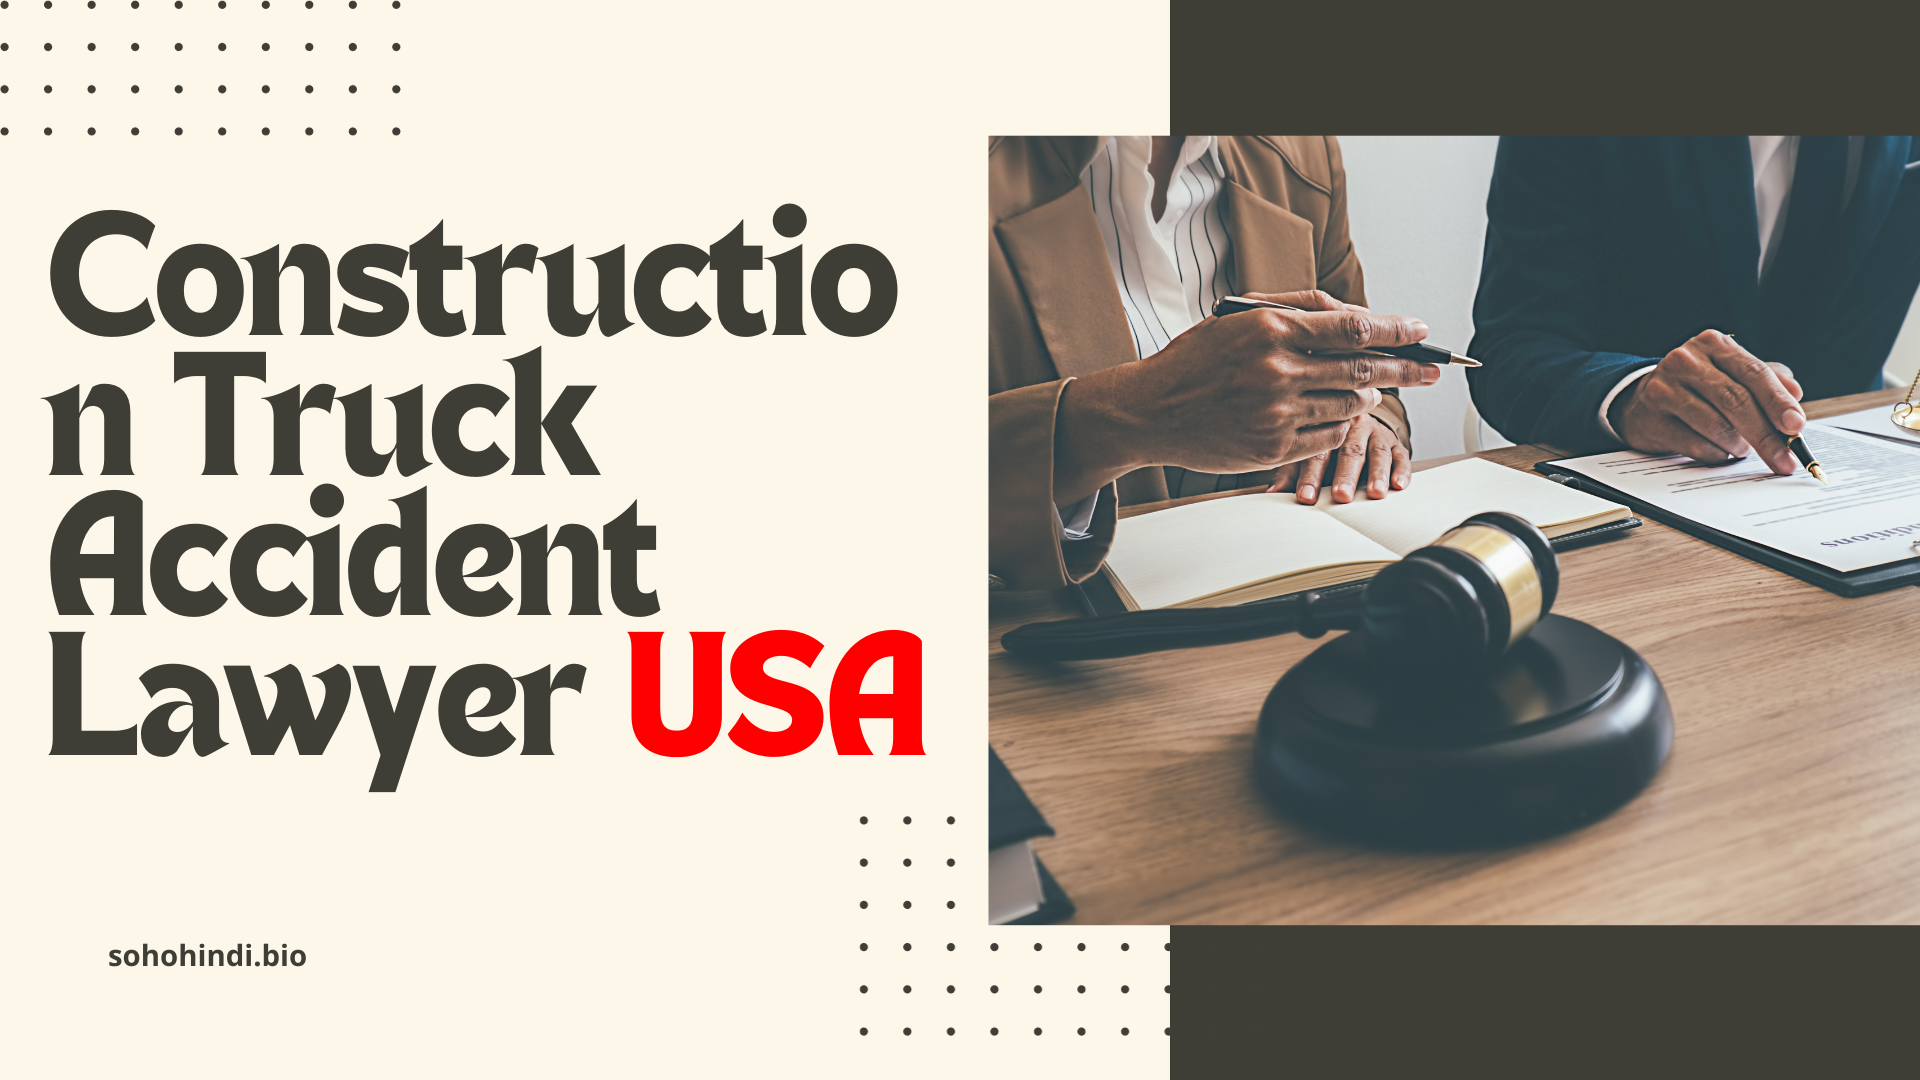 Construction Truck Accident Lawyer USA